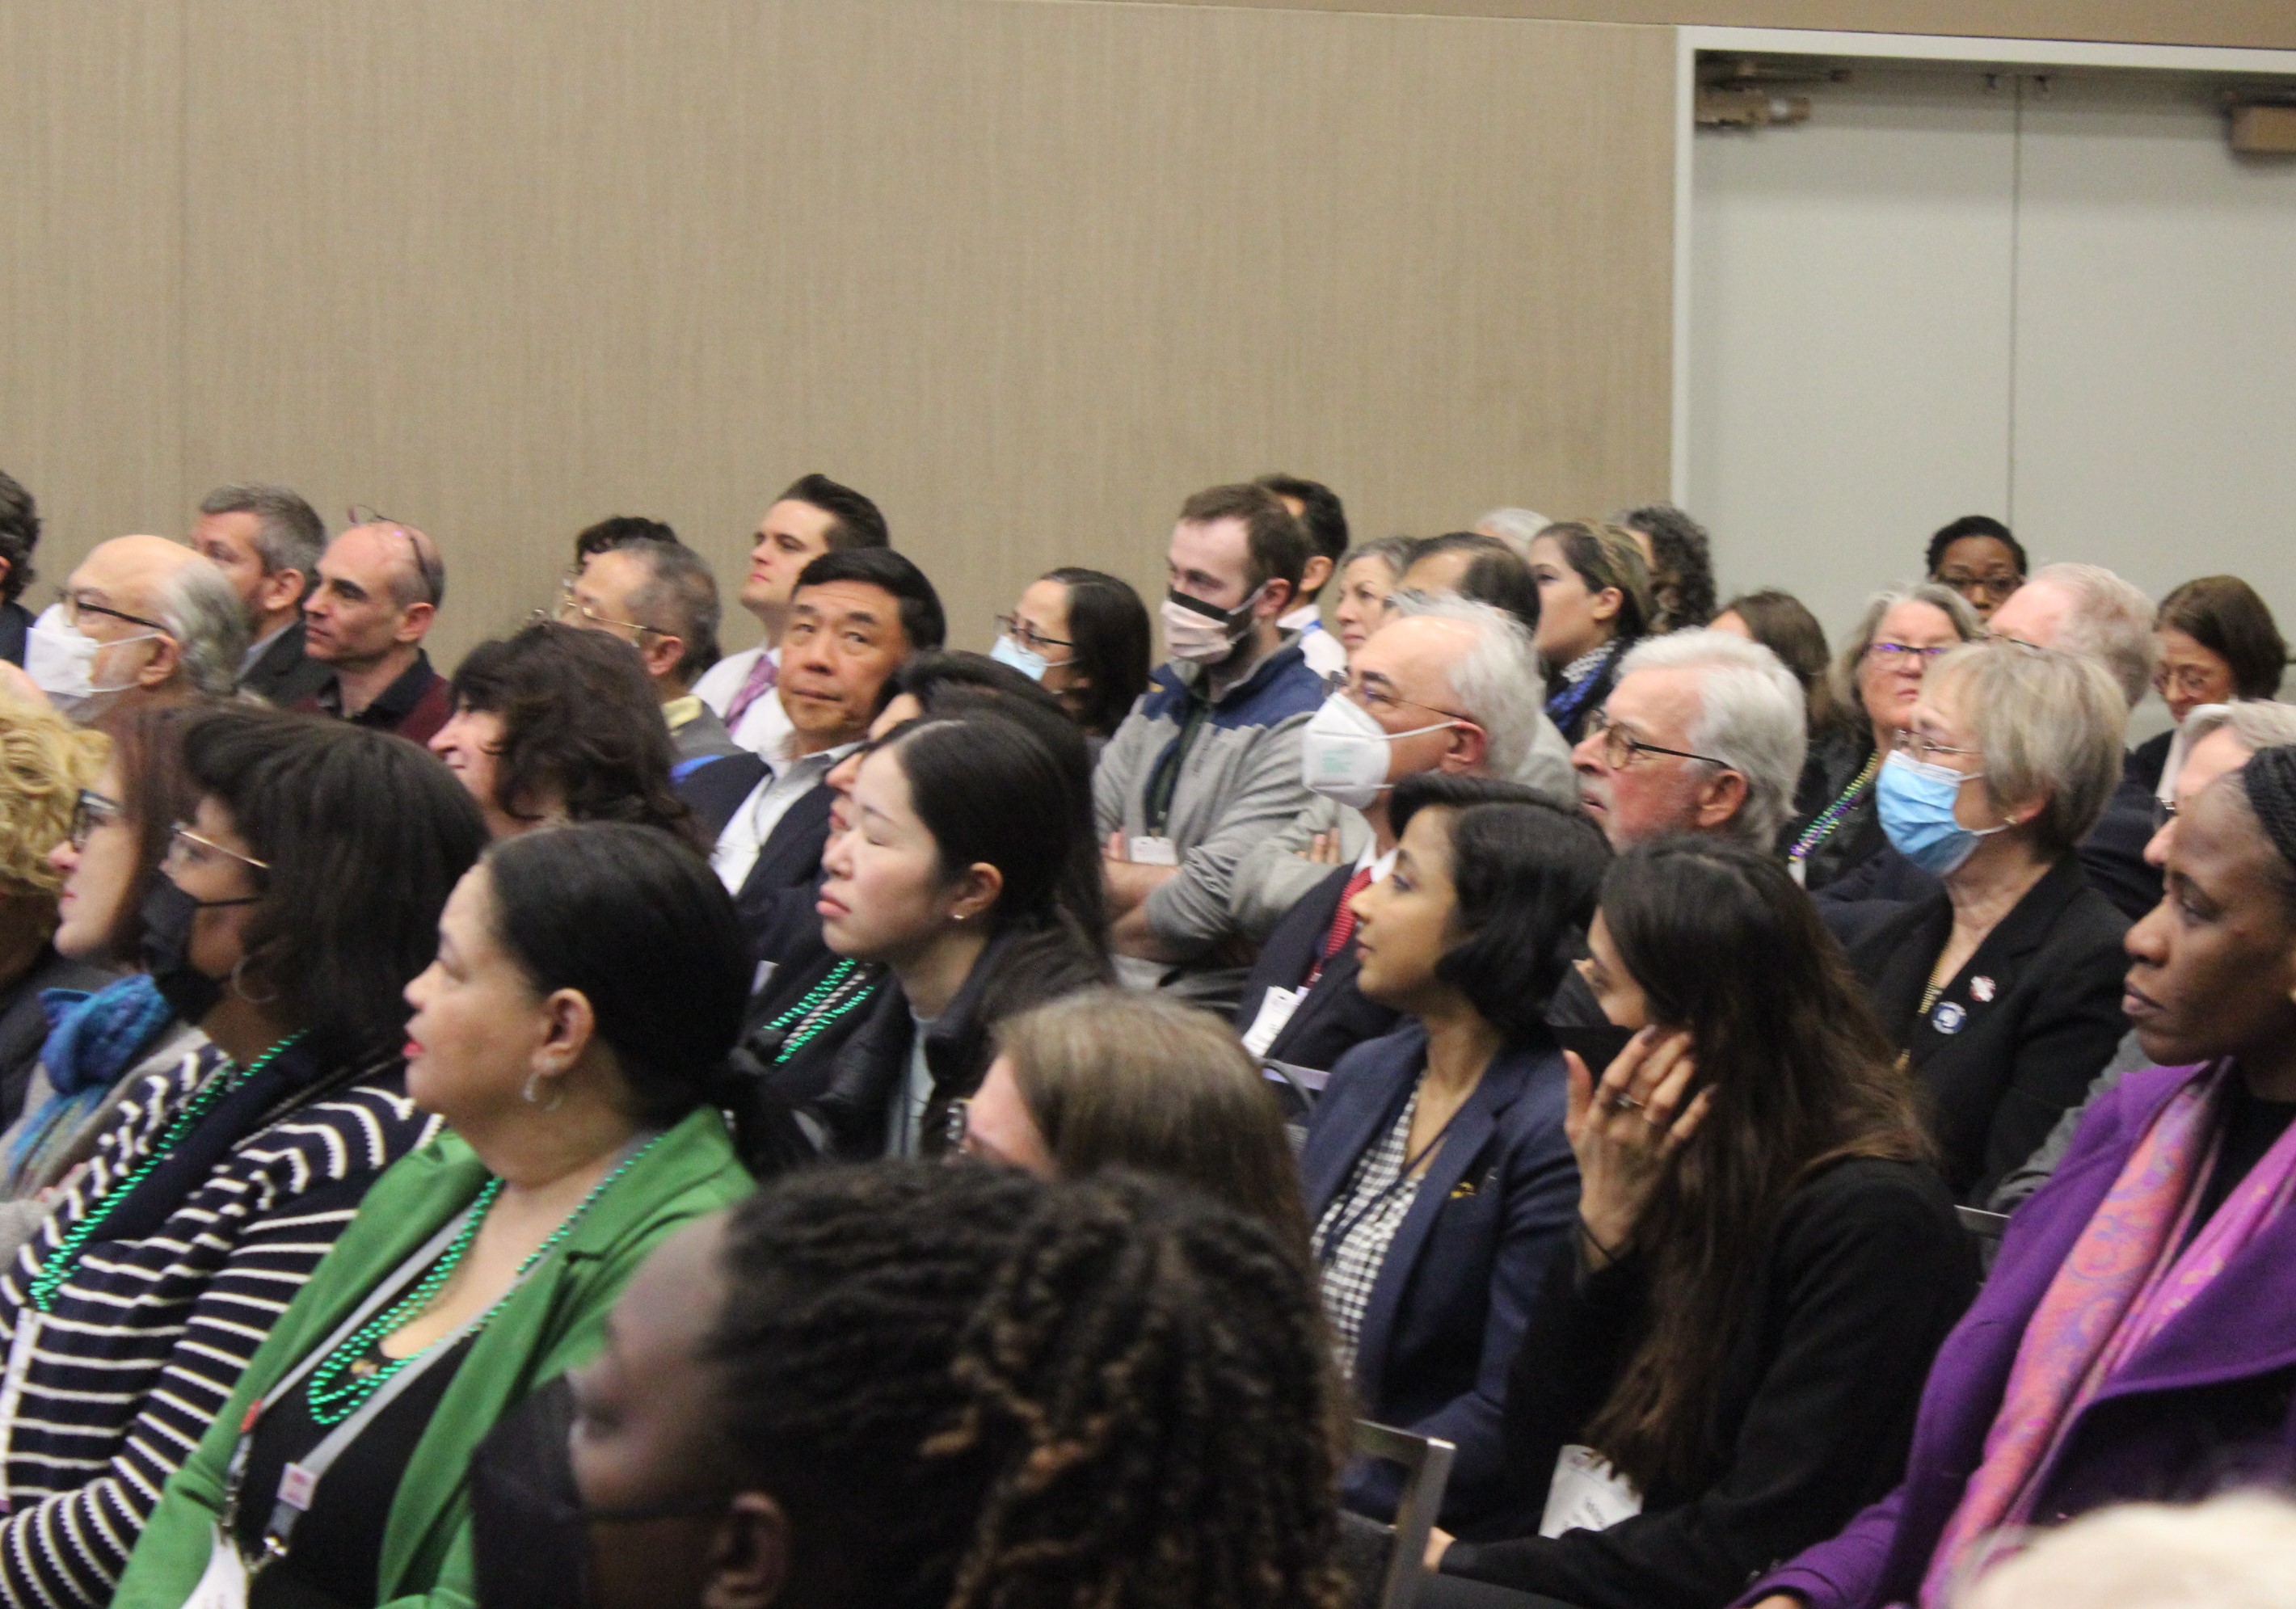 The presenters spoke to a packed audience about NIDCR's scientific milestones and accomplishments. 